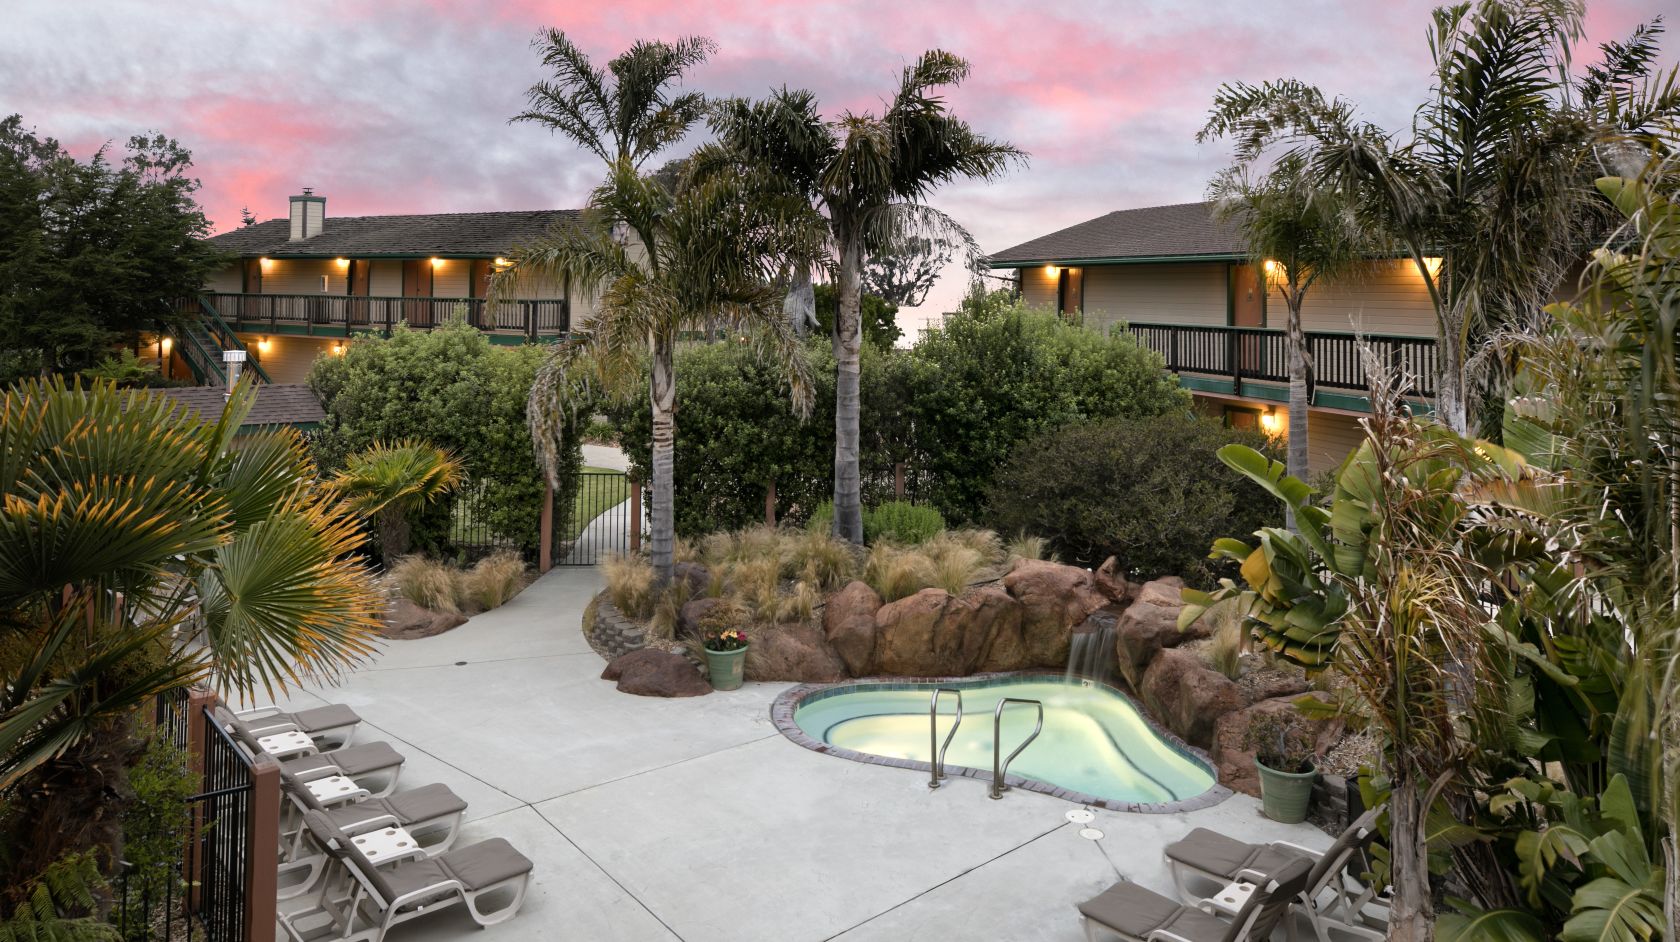 Secluded spa and jacuzzi during sunset at Sea Pines Golf Resort in Los Osos